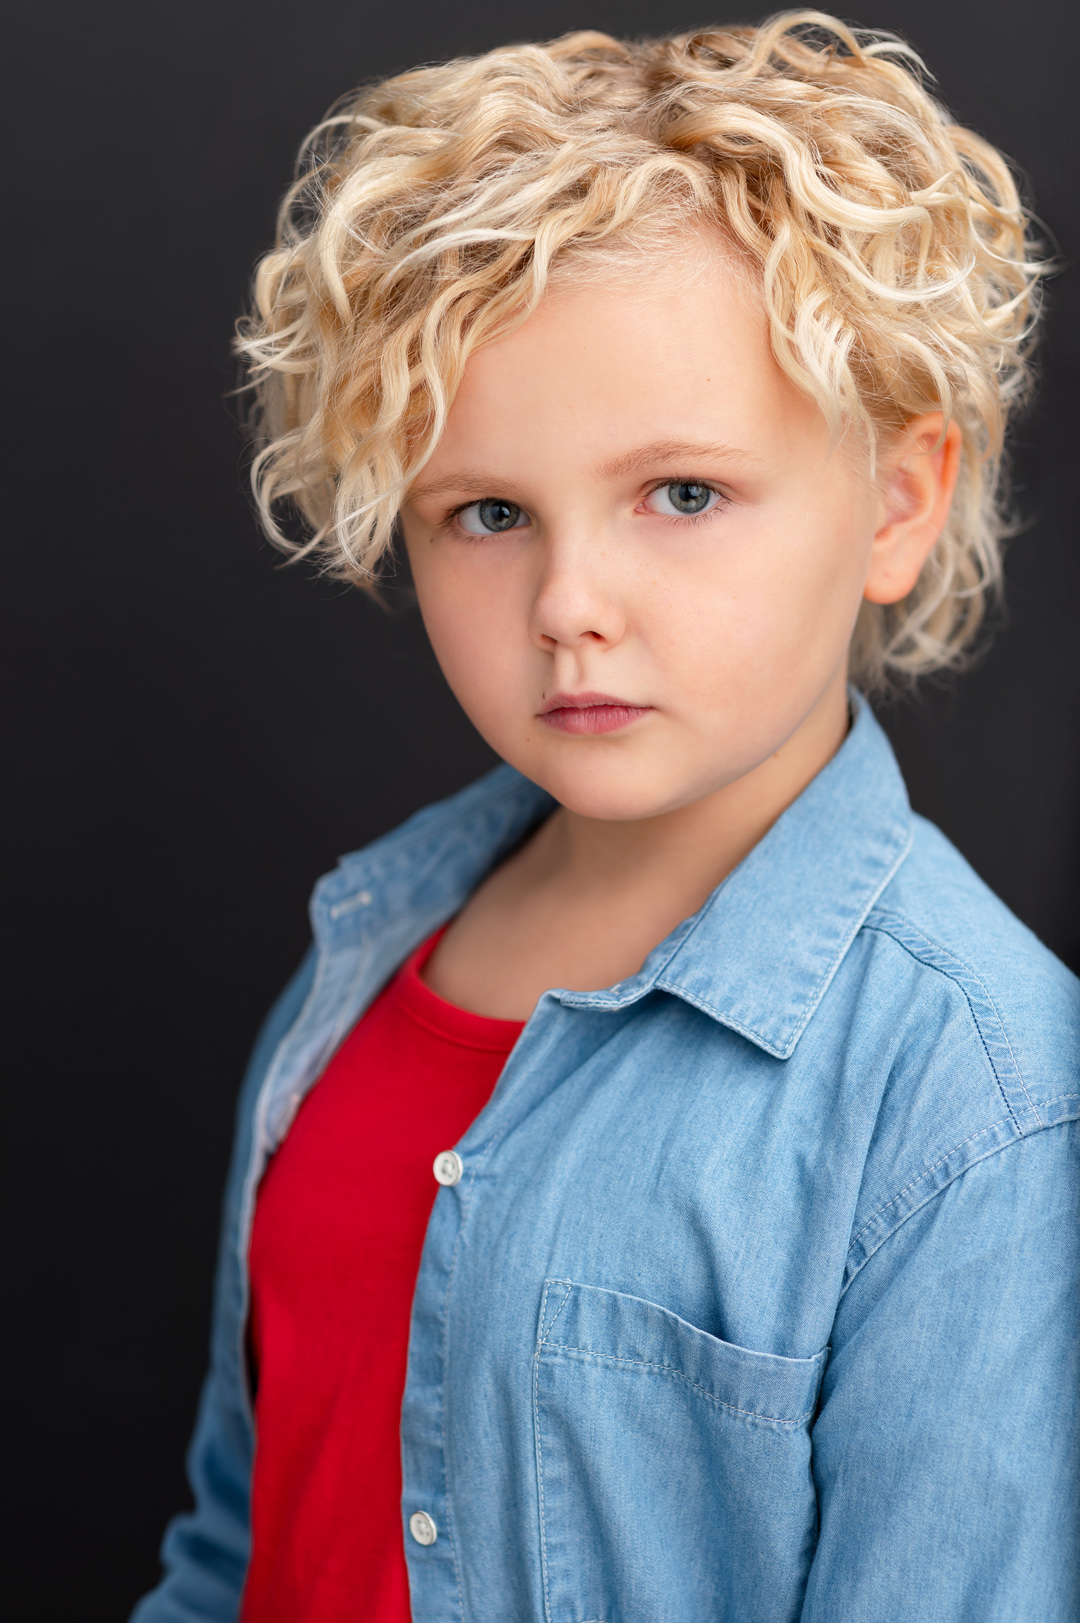 Curly blonde child actress from Vancouver, BC Isla Robinson